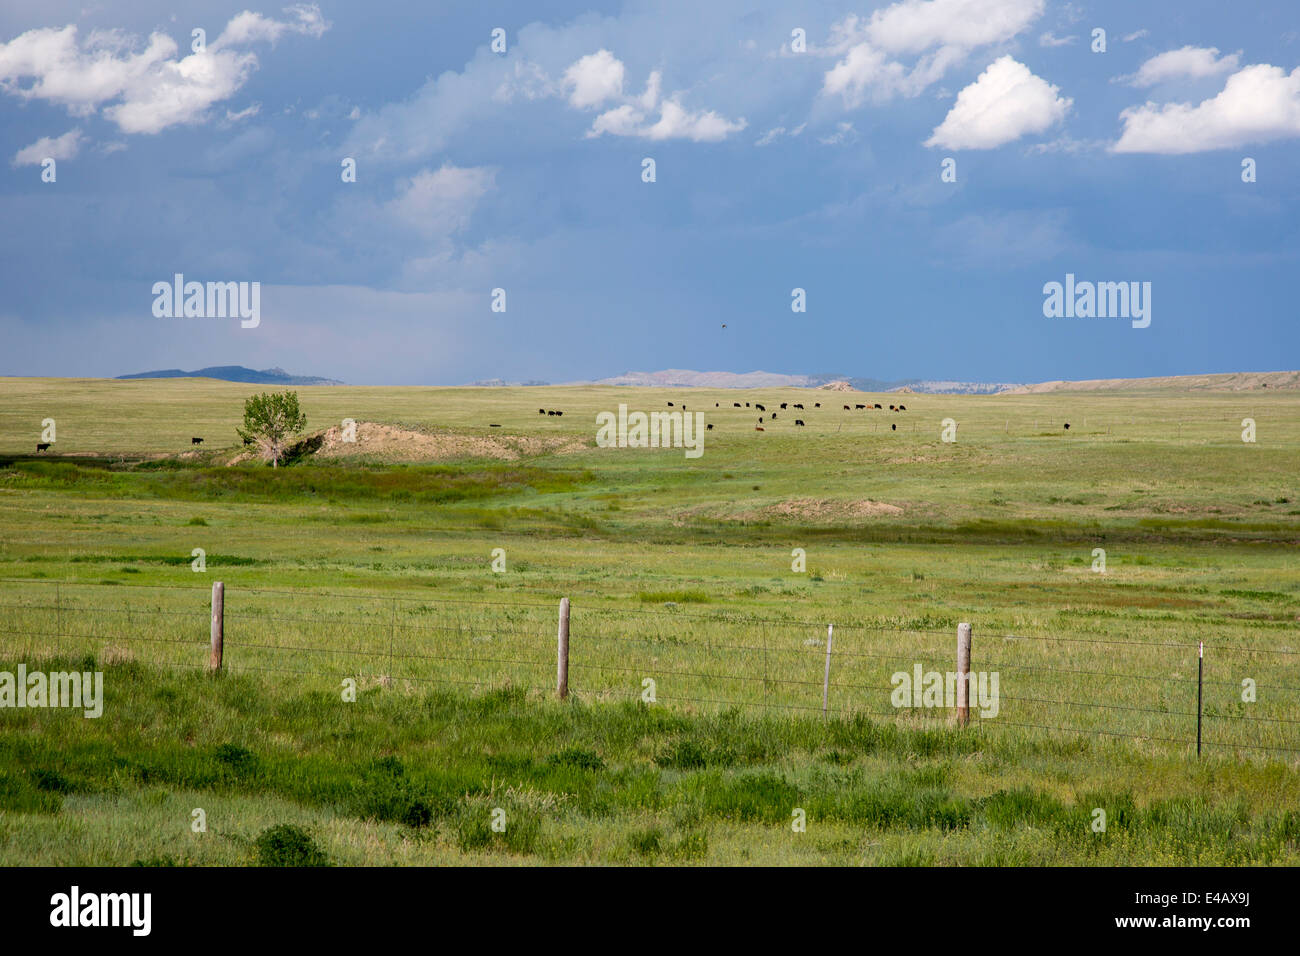 Newcastle, Wyoming - Cattle grazing in eastern Wyoming's grasslands. Stock Photo